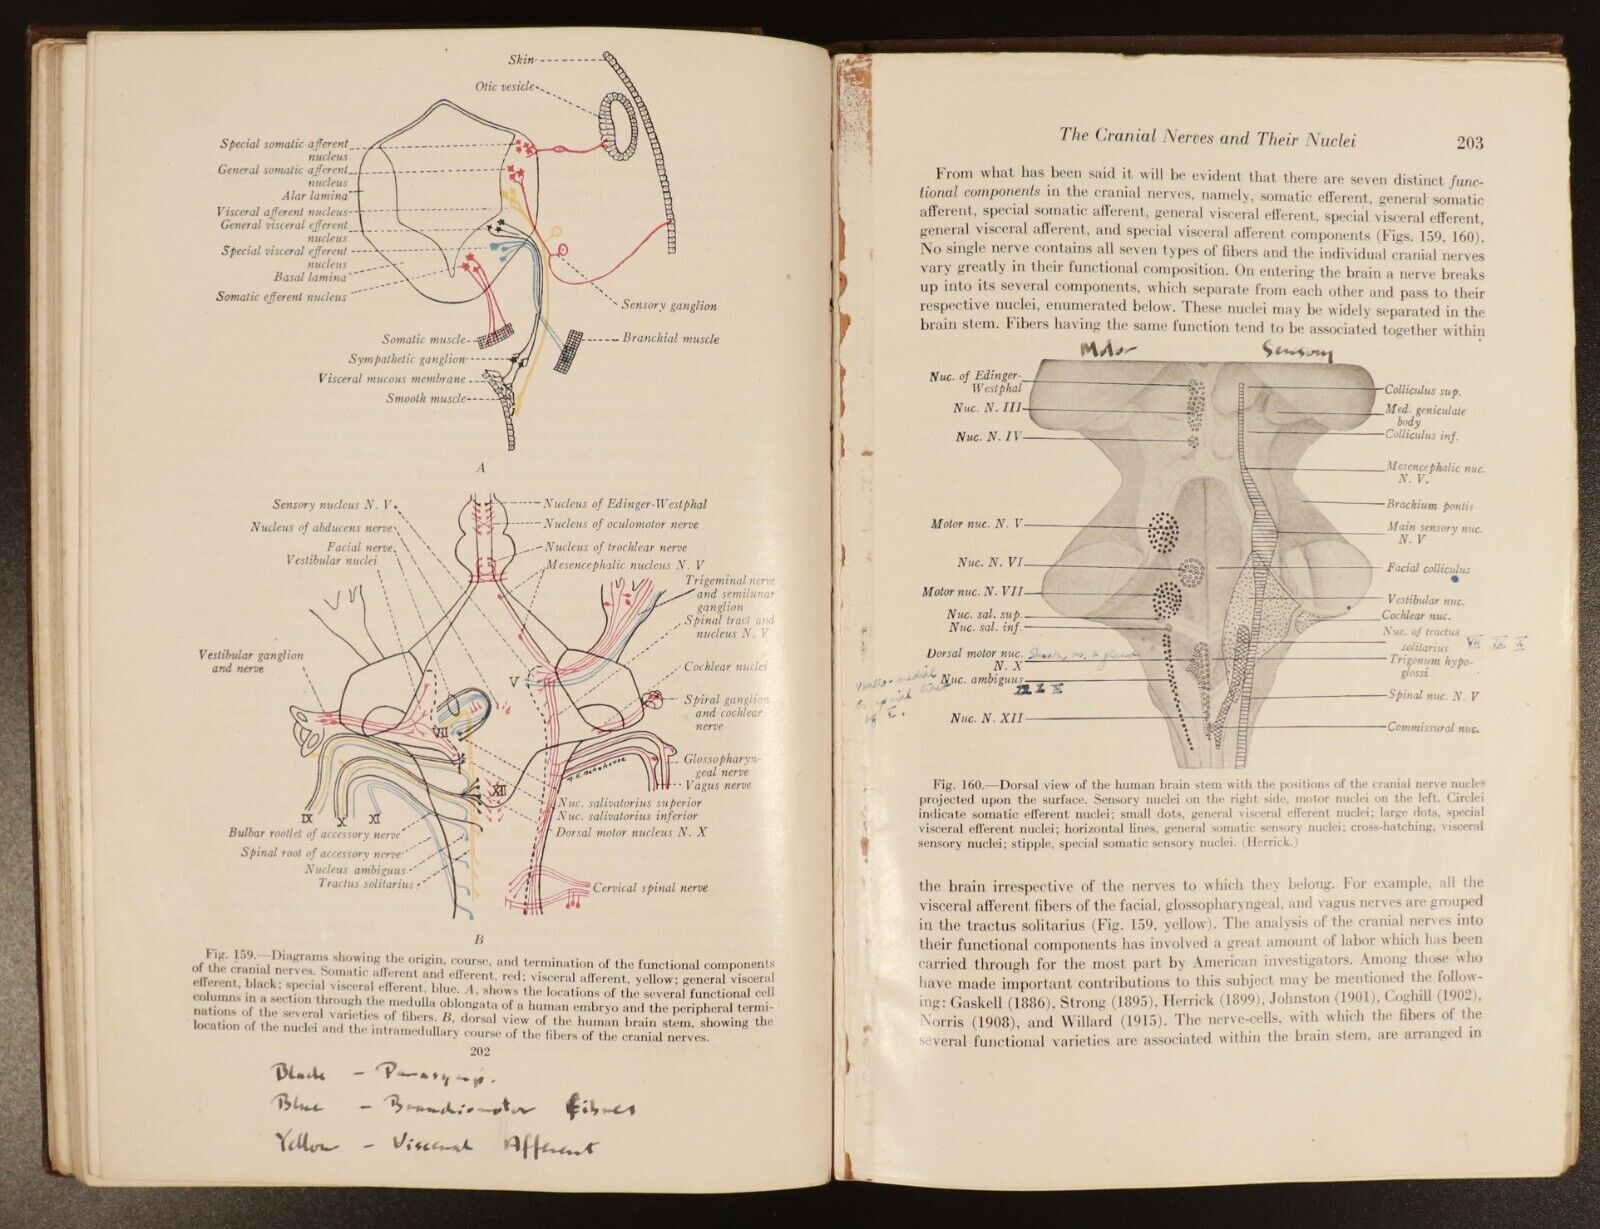 1947 Anatomy Of The Nervous System by S.W. Ranson Antique Medical Reference Book